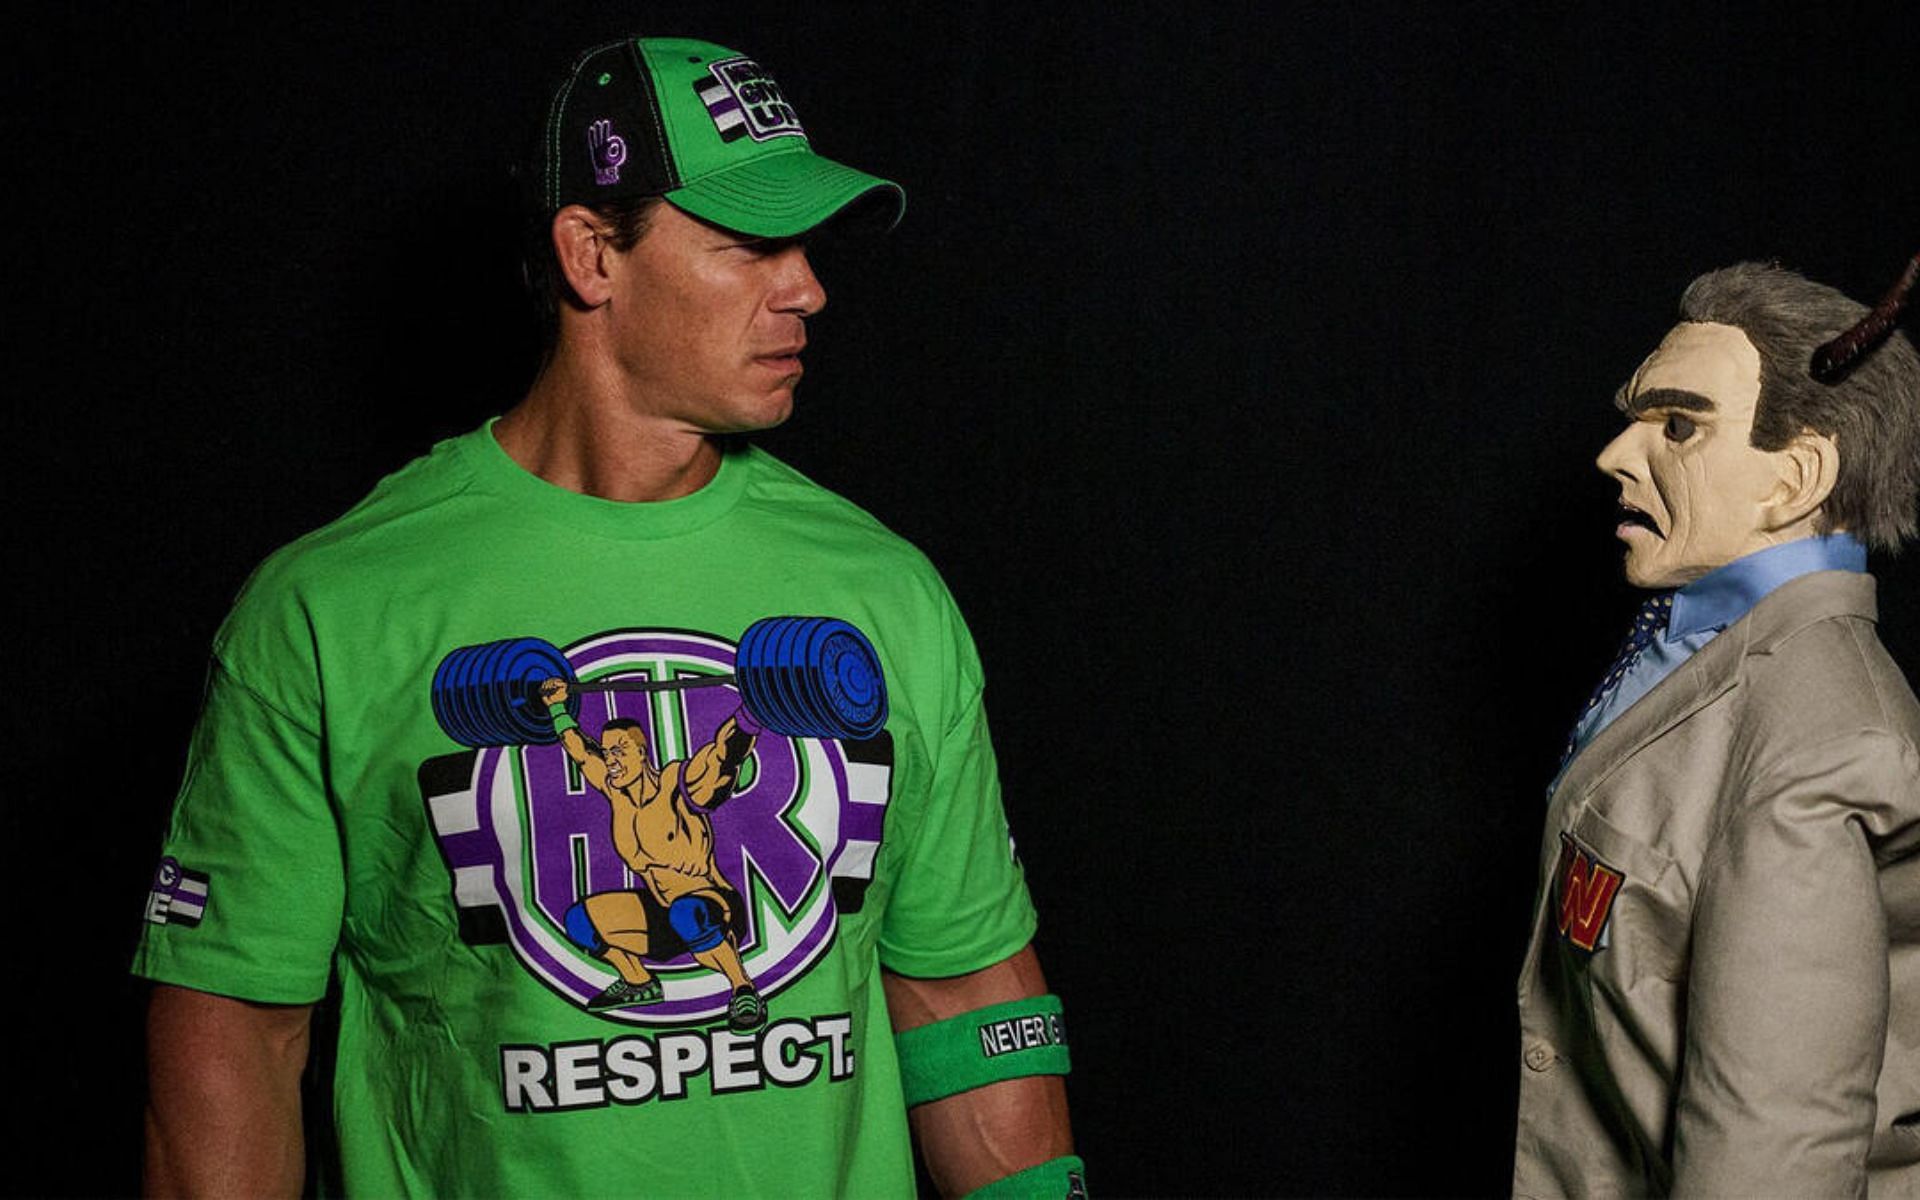 John Cena in the Firefly Funhouse Match at WrestleMania 36 [Image Source: WWE.com]